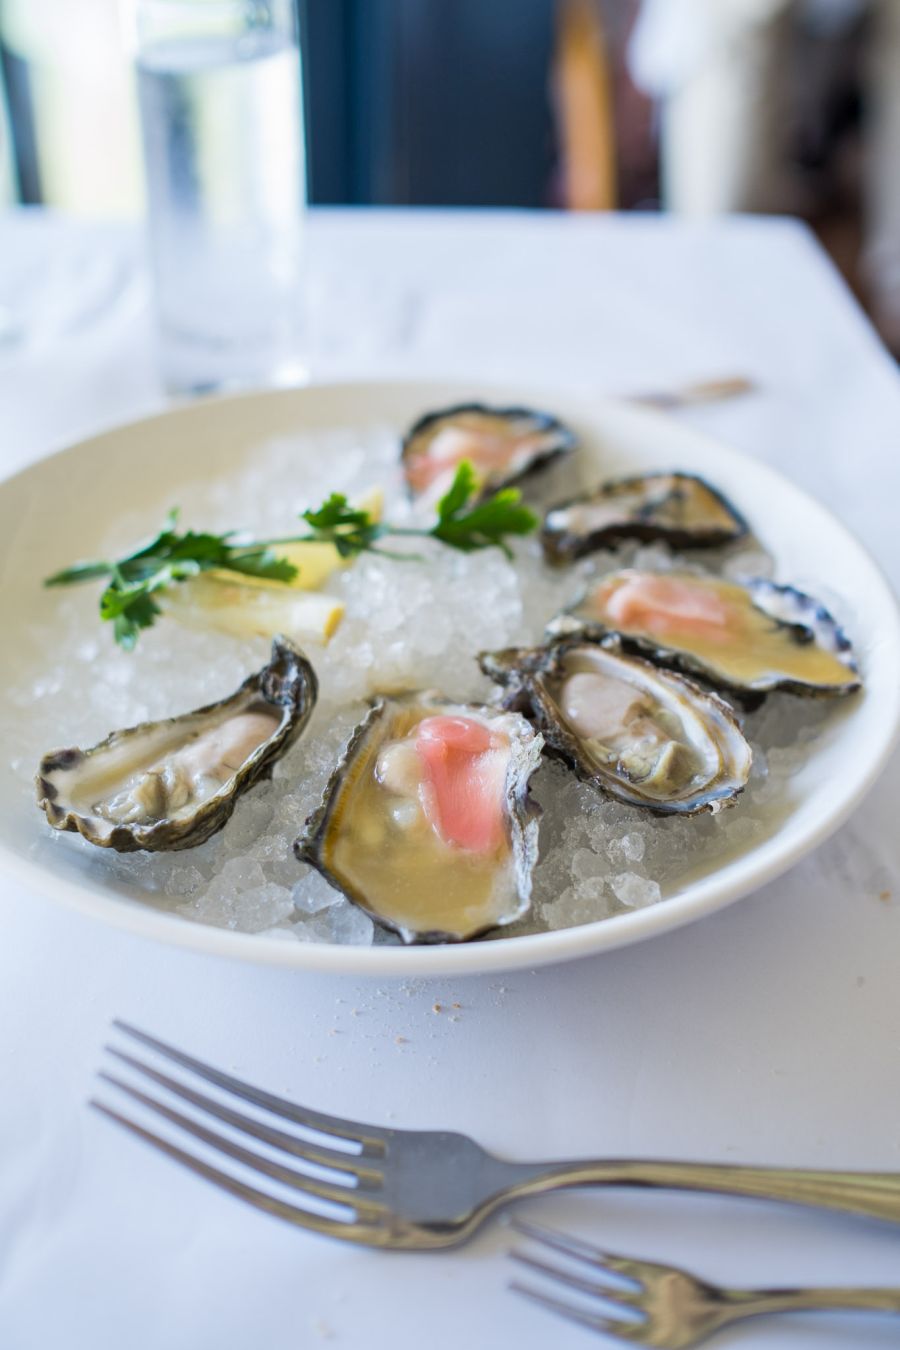 South Australian oysters - natural with fresh lemon (AU$3 each), miso and ginger (AU$4 each)